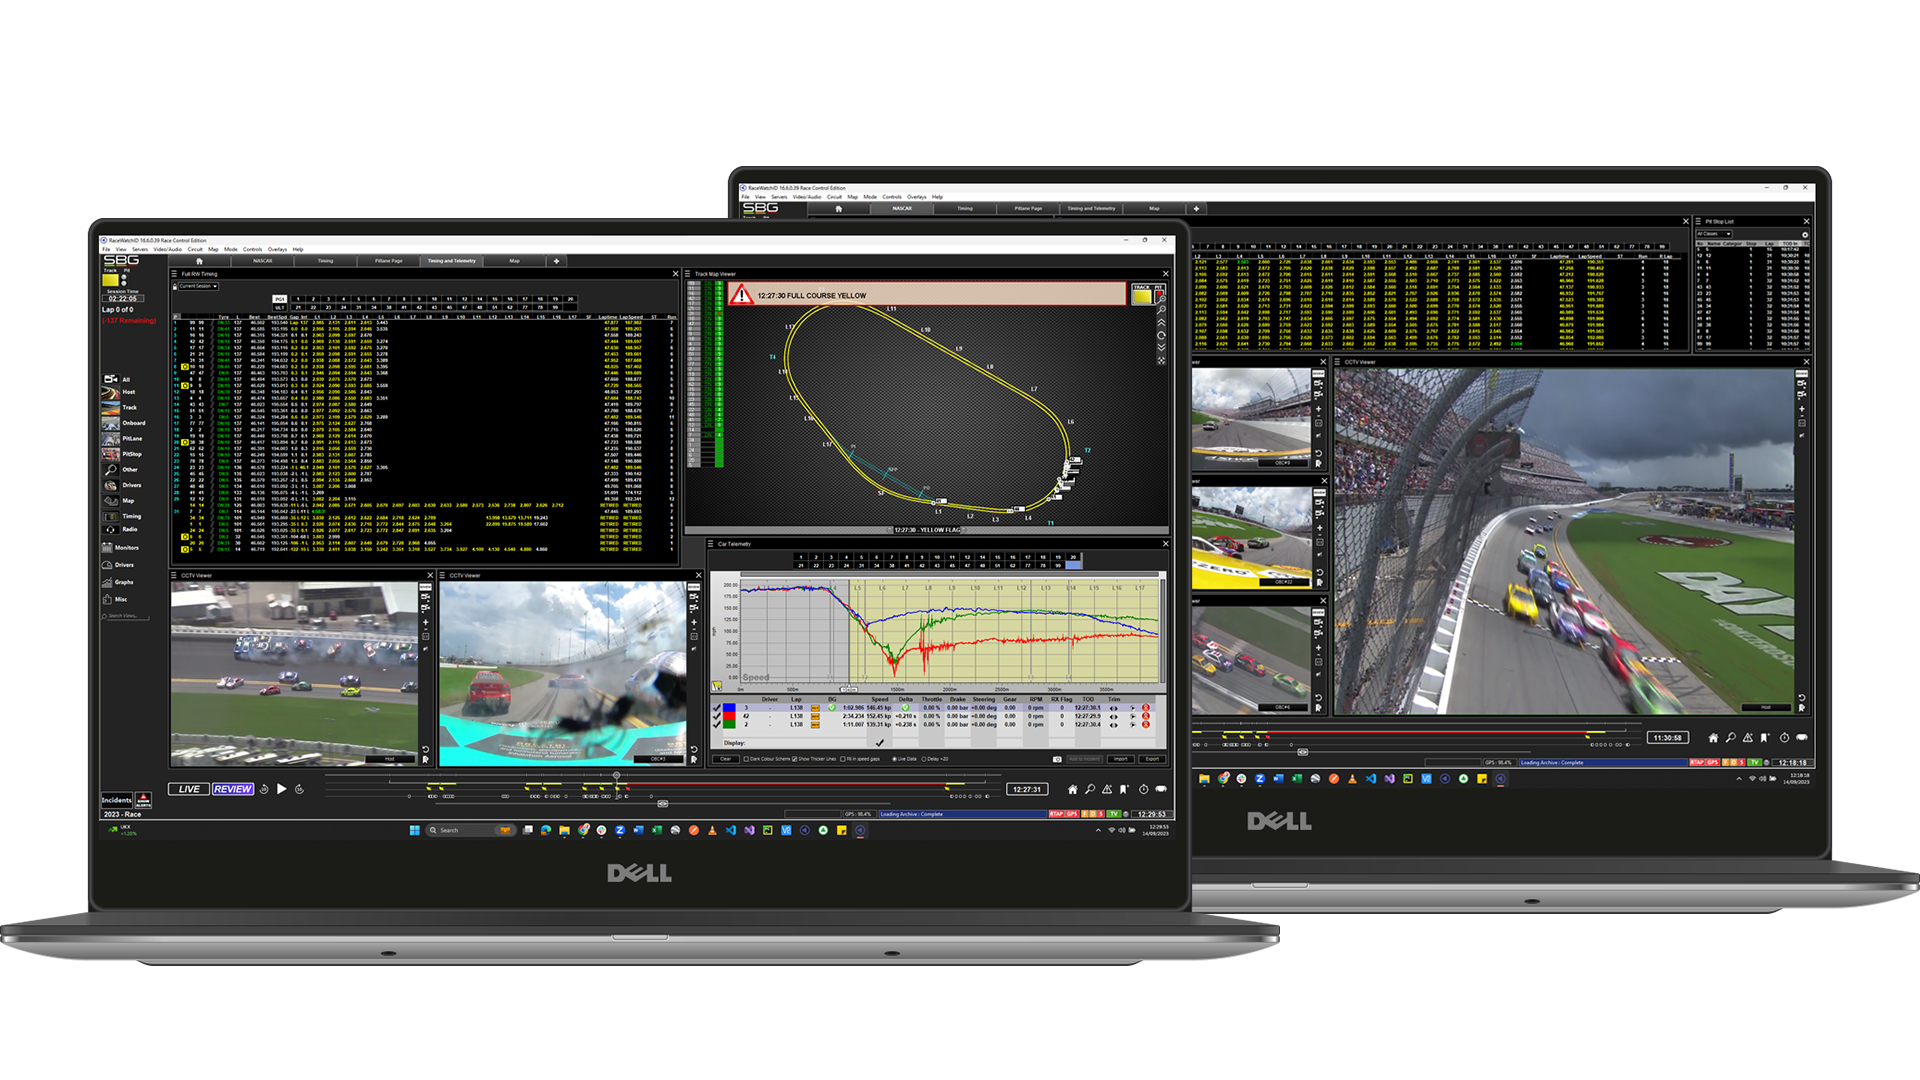 RaceWatch suite of sophisticated data analysis, visualisation, video and strategy systems are in constant use by race organisers and teams throughout the season both at the track and at the team factories all around the world.